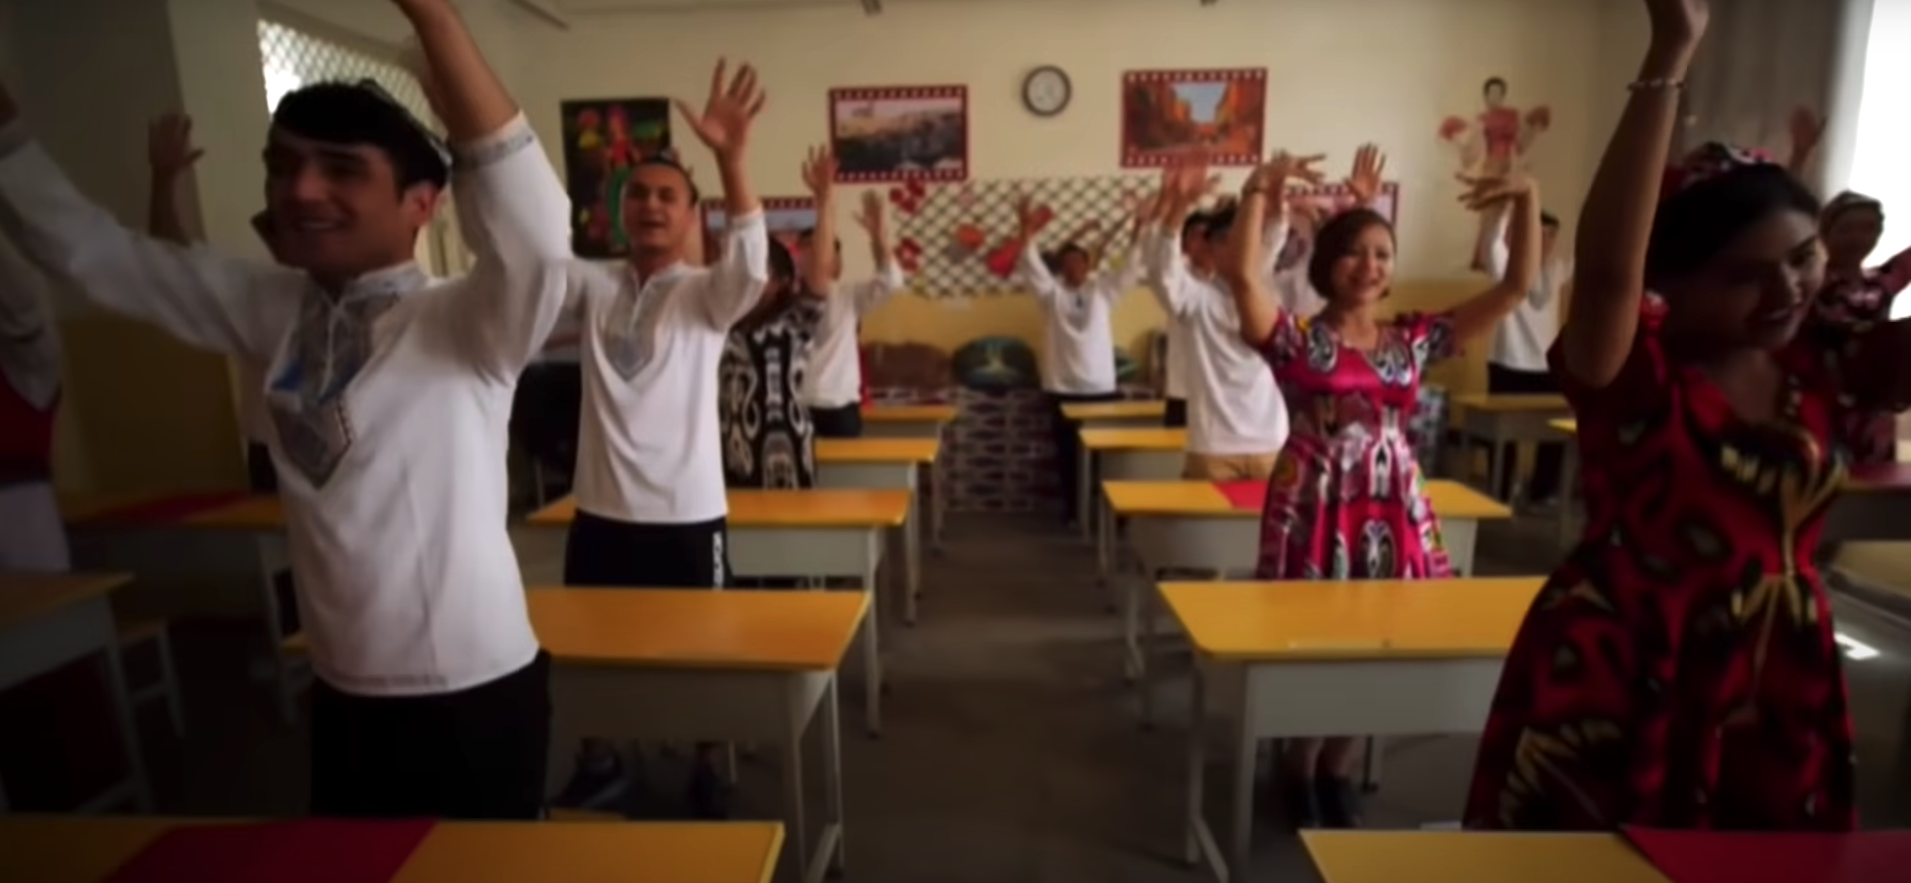 On a guided tour the BBC is shown singing and dancing Uyghurs within the "vocational centers" in June 2019. [YouTube/Screenshot/BBCNews]